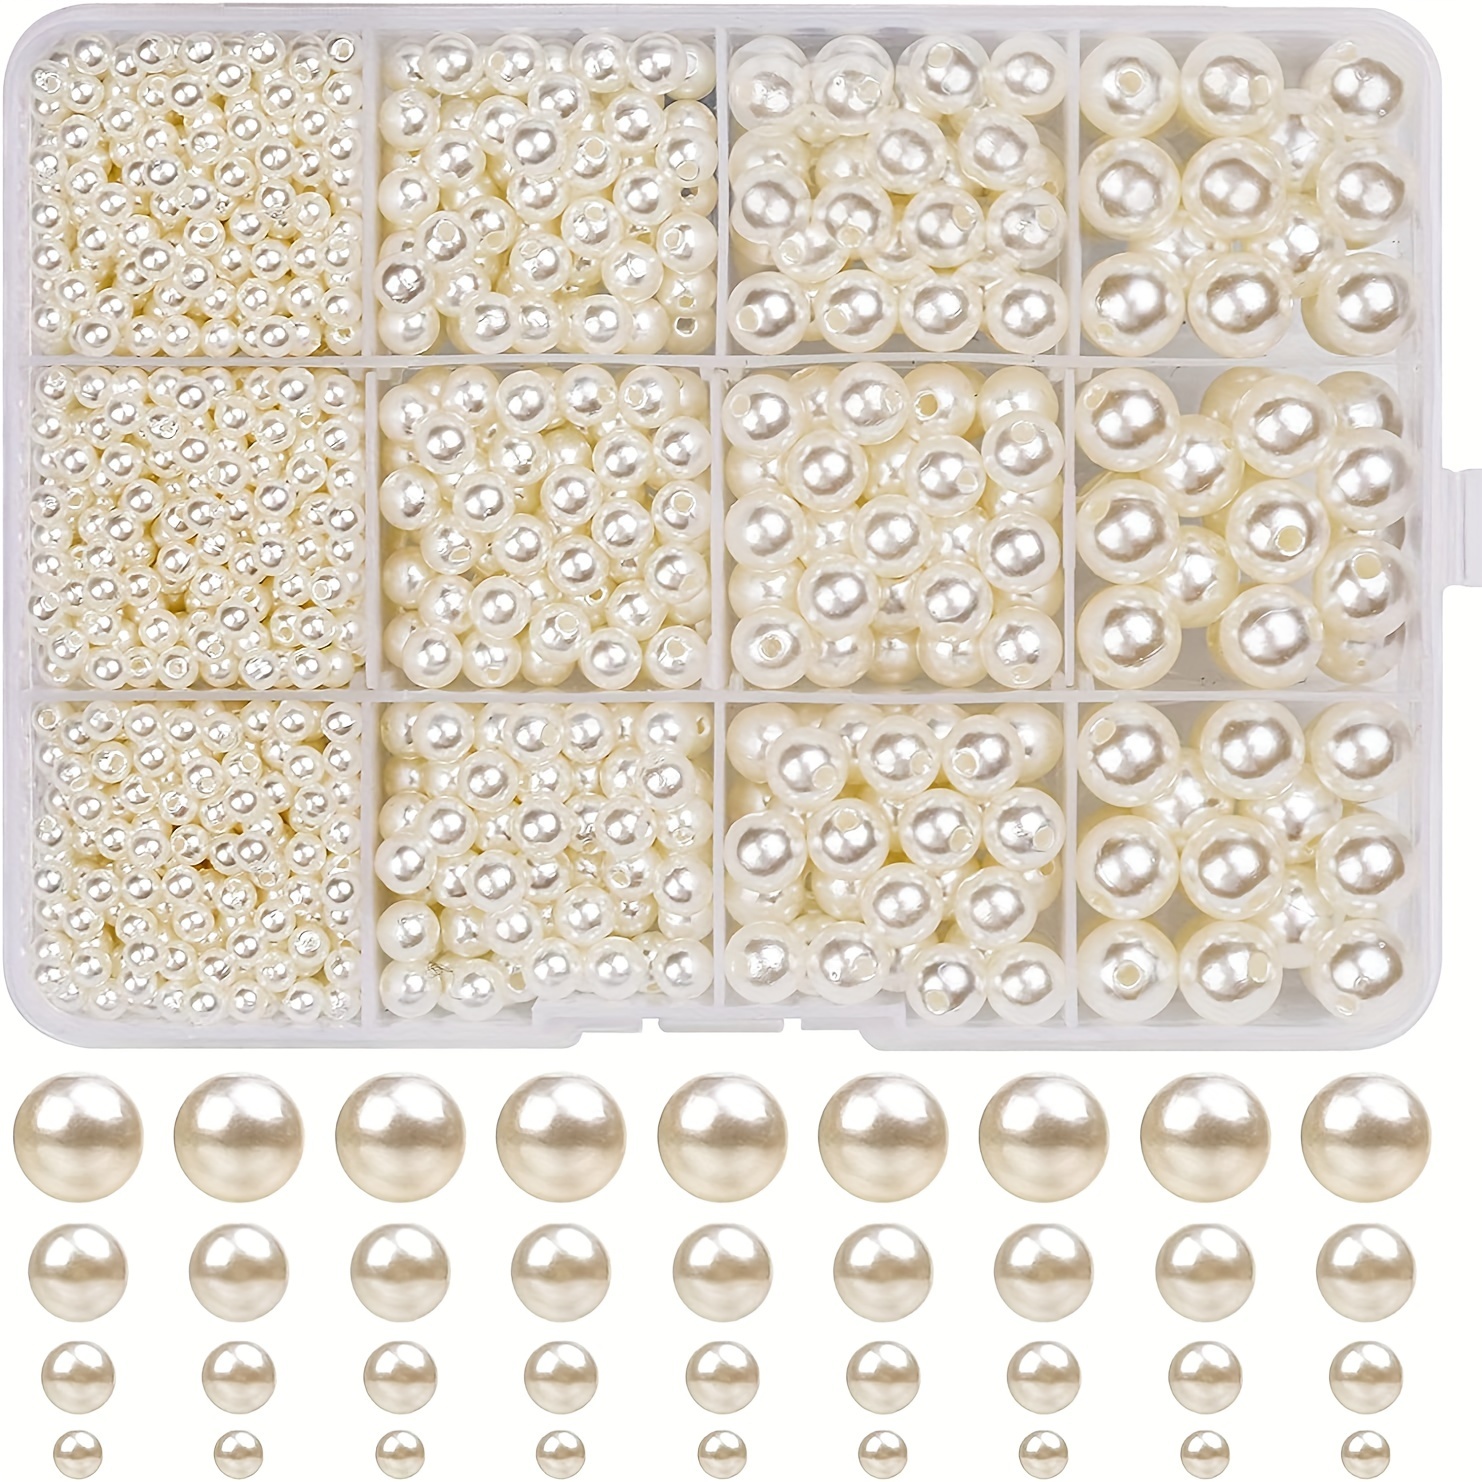 

1320 Pcs Beading Kit Assorted Sizes 4/6/8/10mm Fashion Round Pearls In White & Off-white With Storage Box - Hollow Glass Beads For Diy Bracelet, Necklace Jewelry Making And Crafts